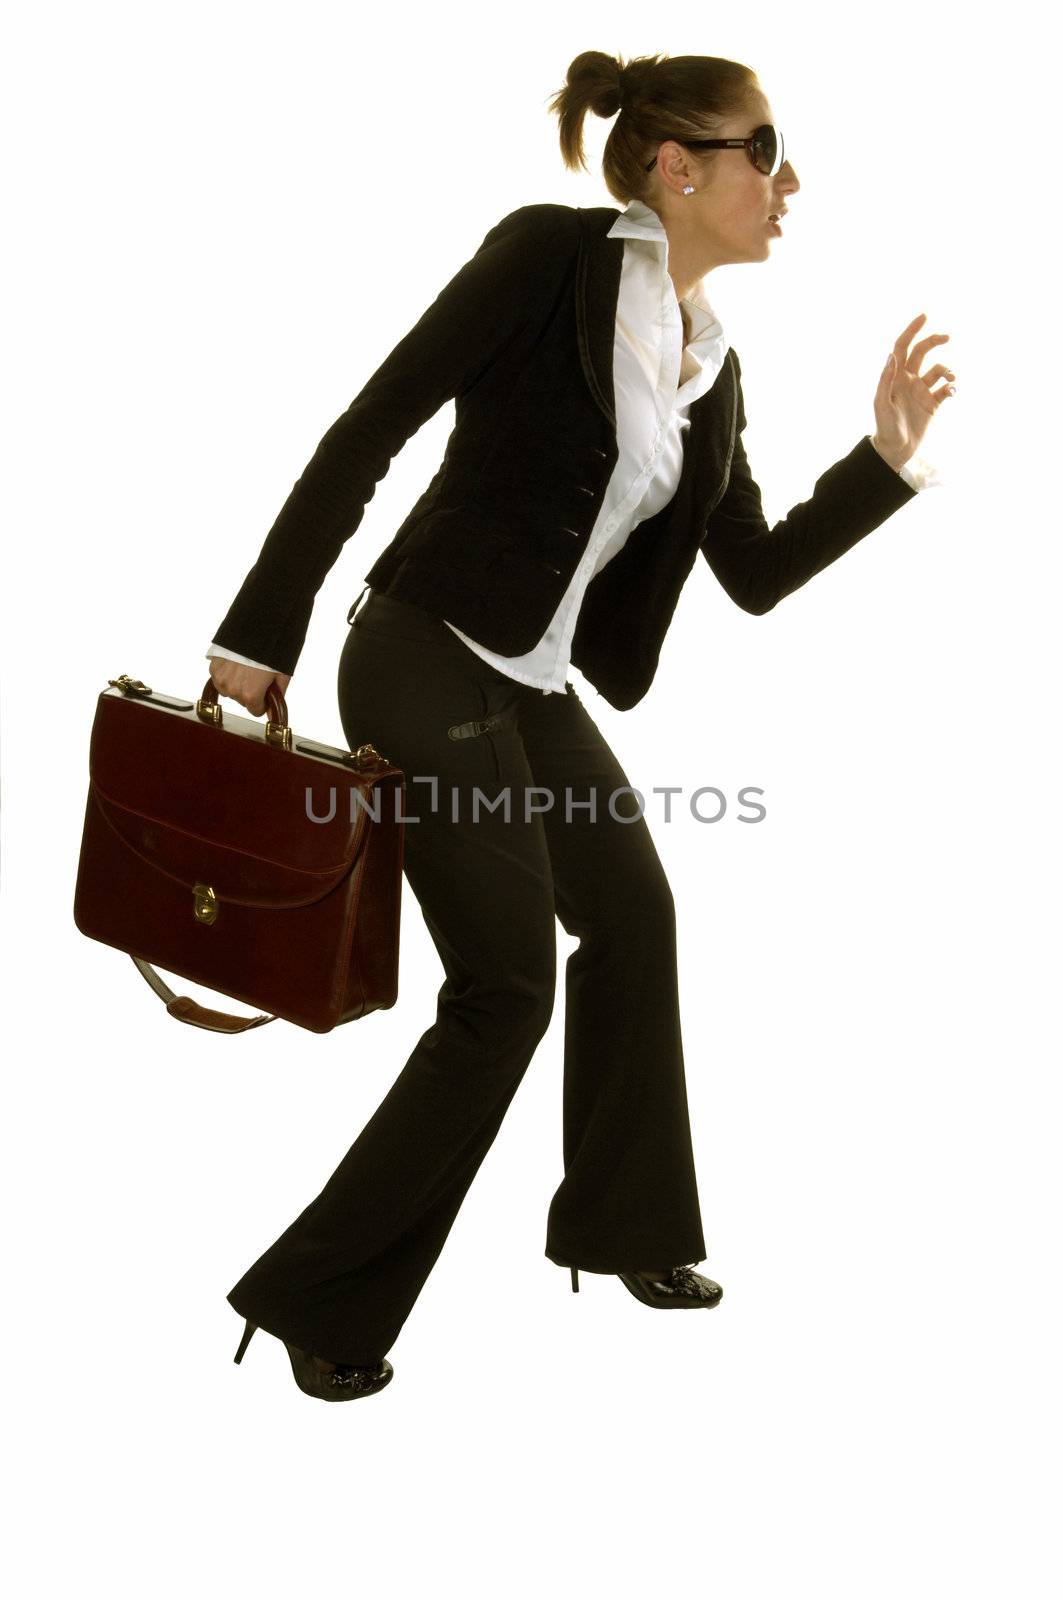 Thieft in businessman clothing with briefcase